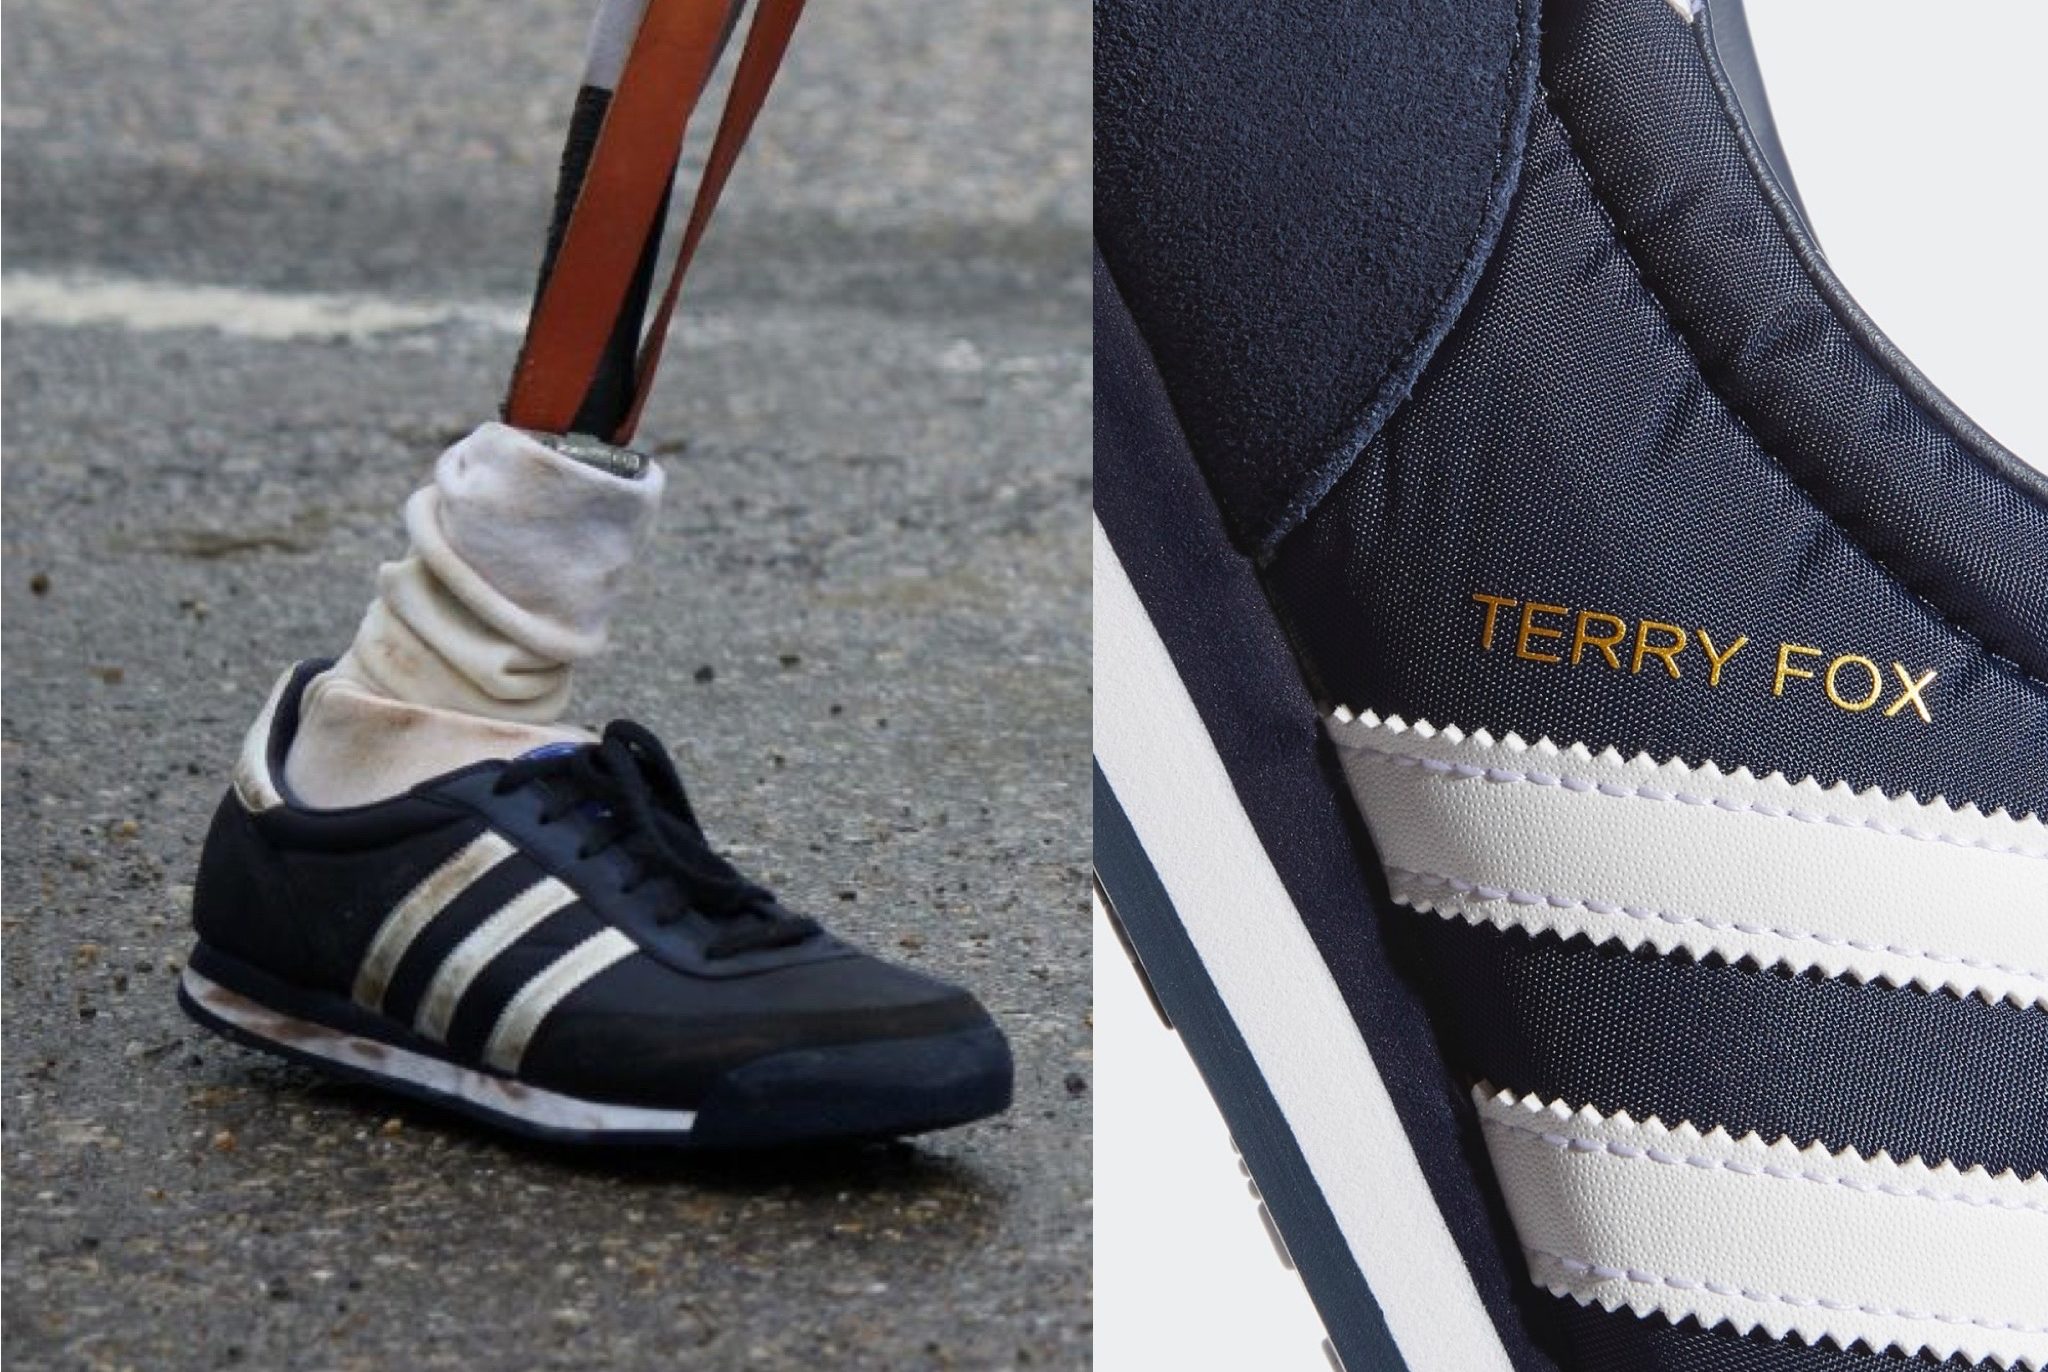 Adidas is releasing Terry Fox inspired 